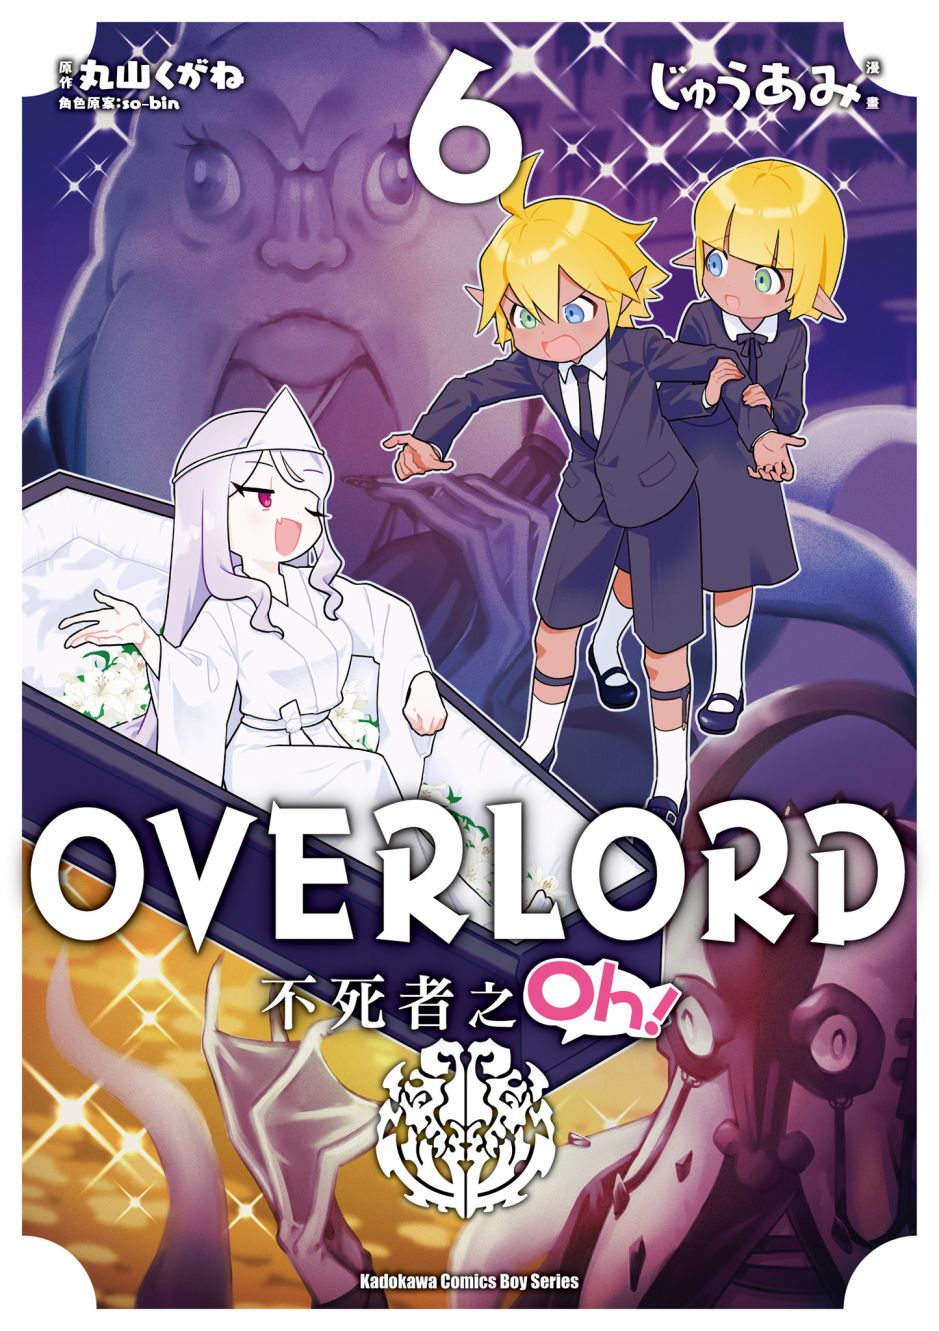 Overlord不死者之OH！ - 第06卷(1/3) - 1